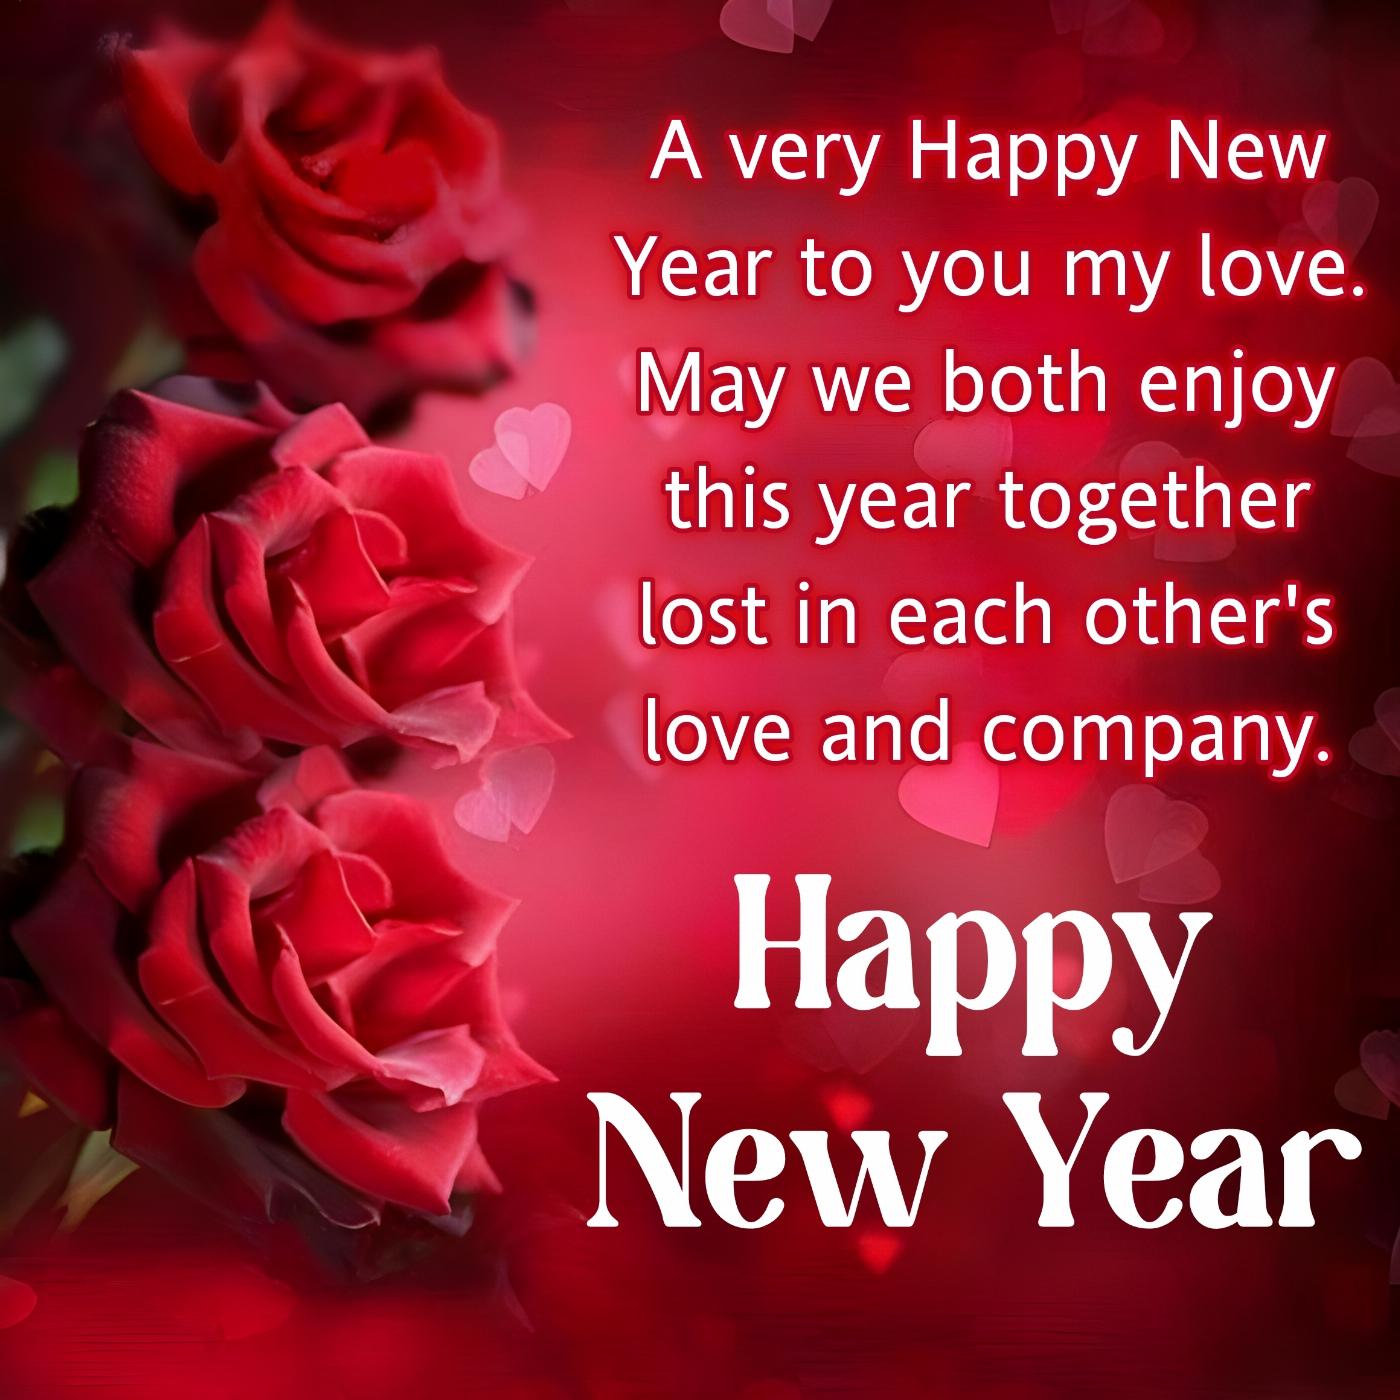 A very Happy New Year to you my love